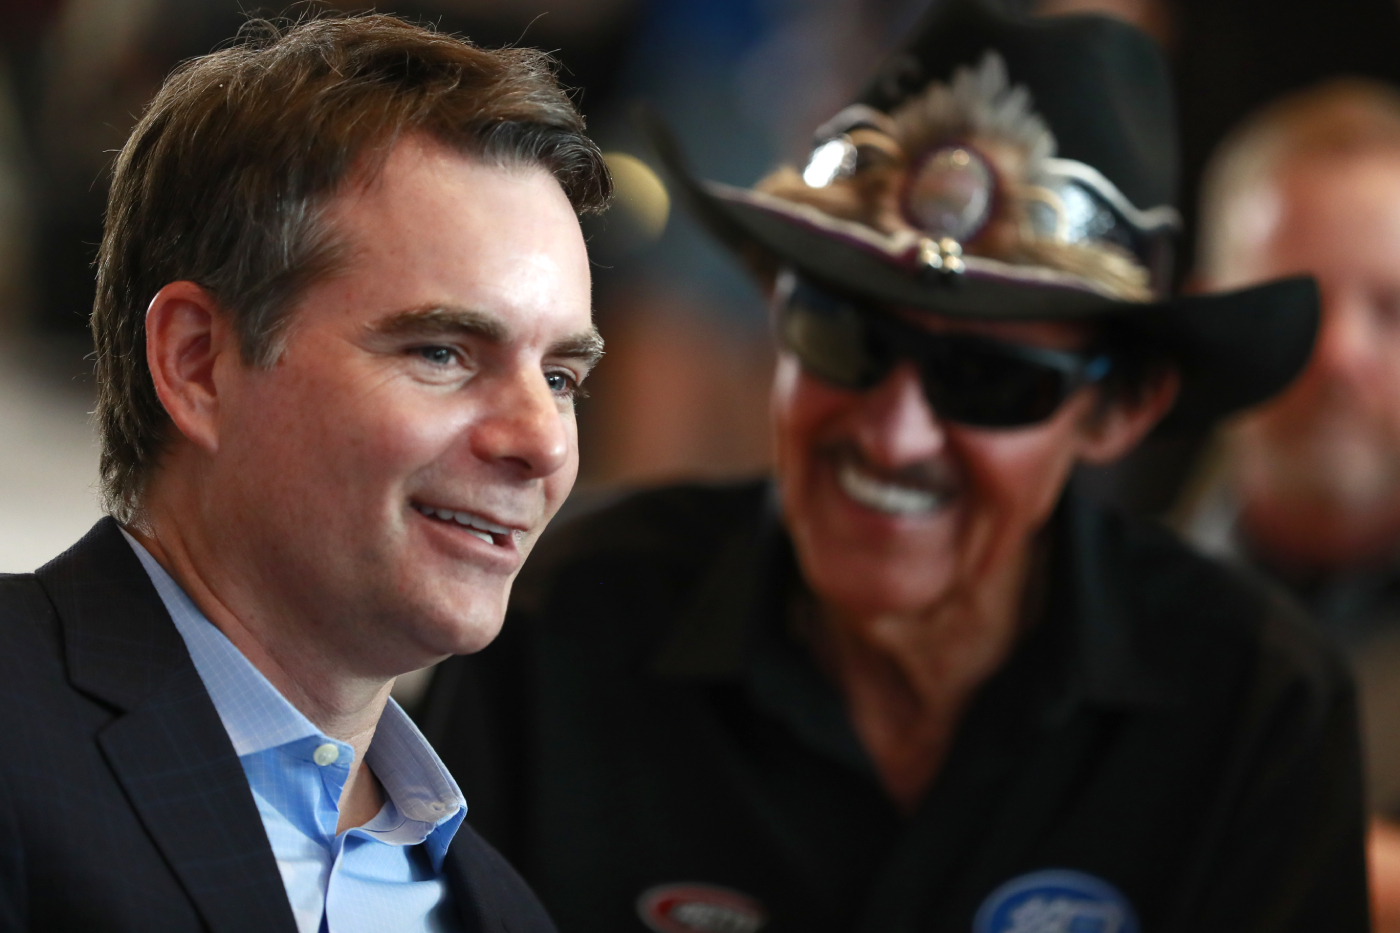 Jeff Gordon's biggest achievement might be the high praise from another racing legend.